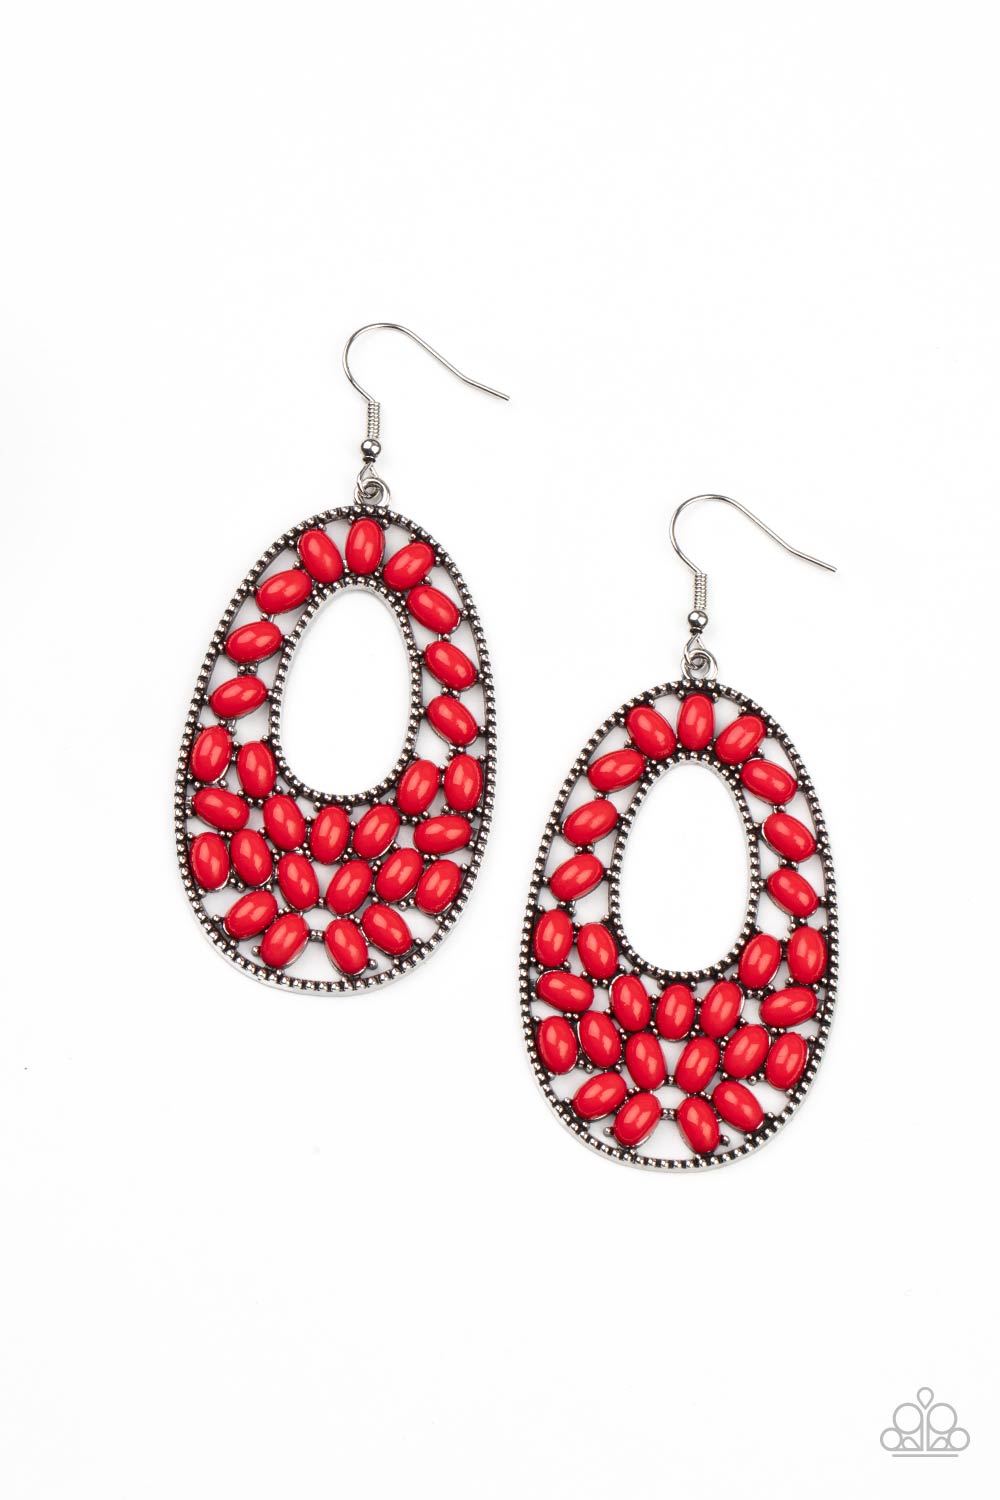 Paparazzi Beaded Shores - Red Earrings - A Finishing Touch Jewelry